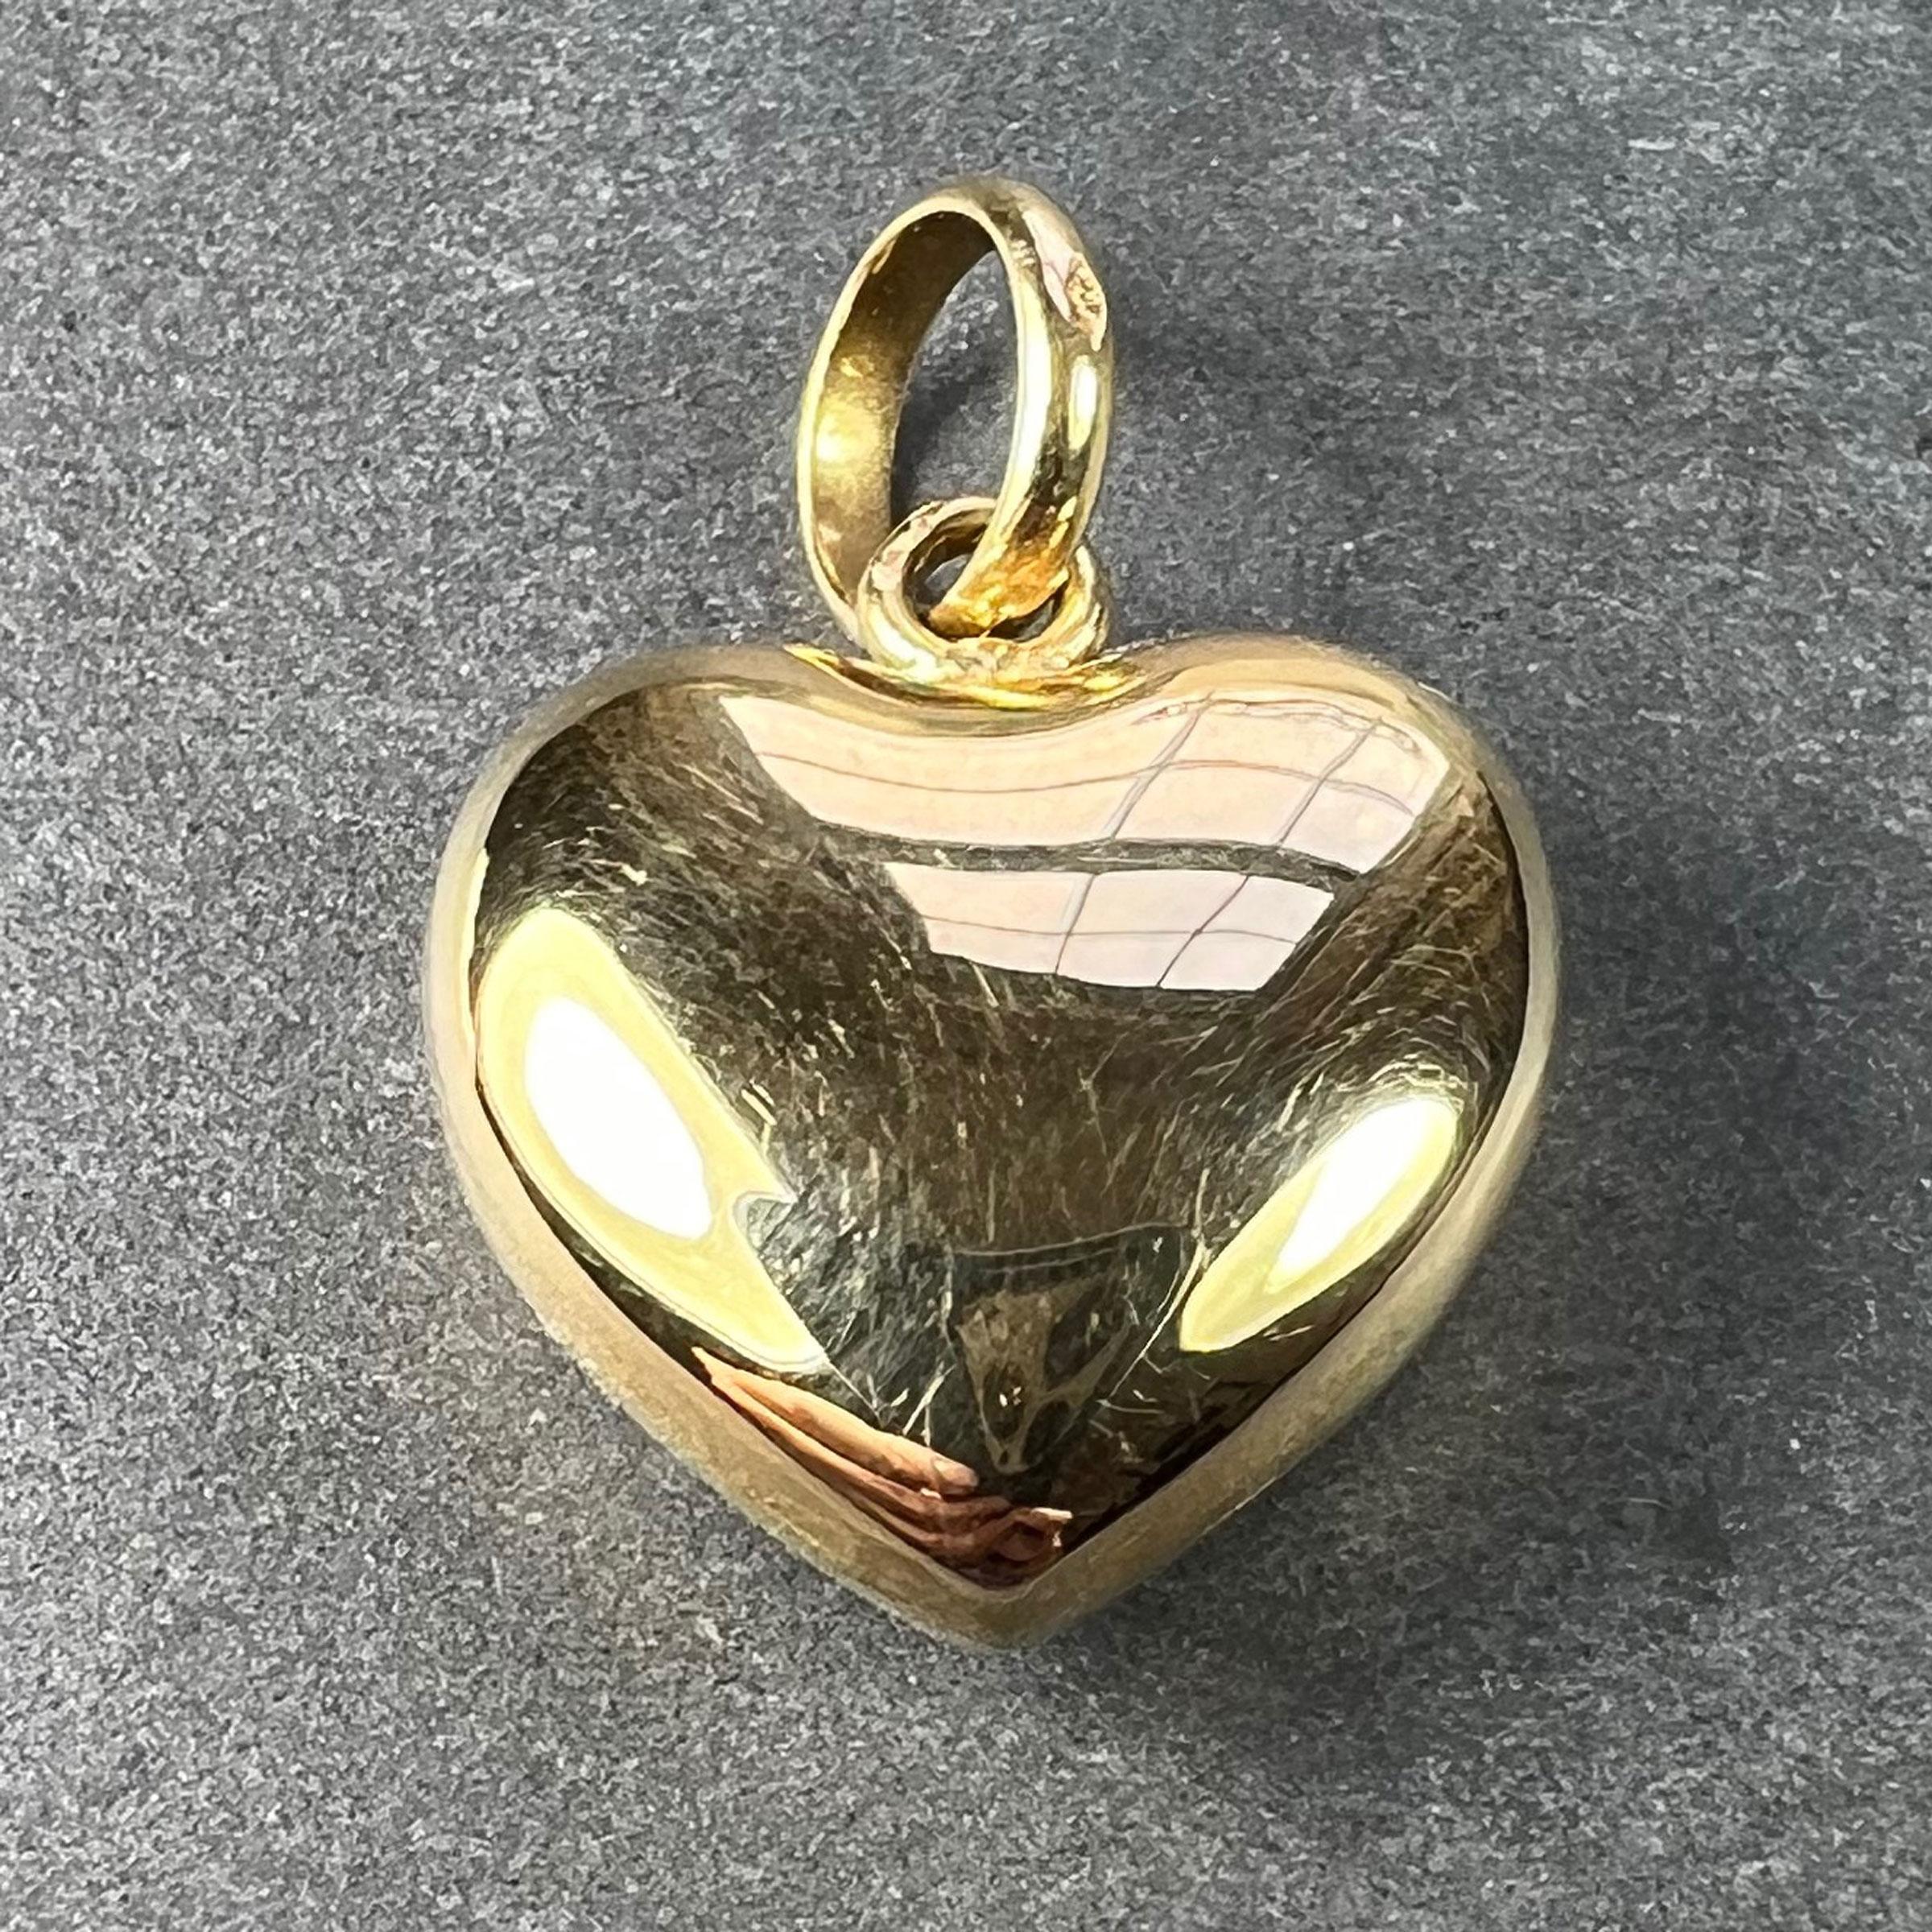 An 18 karat (18K) yellow gold charm pendant designed as a puffy love heart, with a brushed satin finish to one side, and the other polished to a shine. Stamped 750 for 18 karat gold to the inside of the pendant bail, with French import